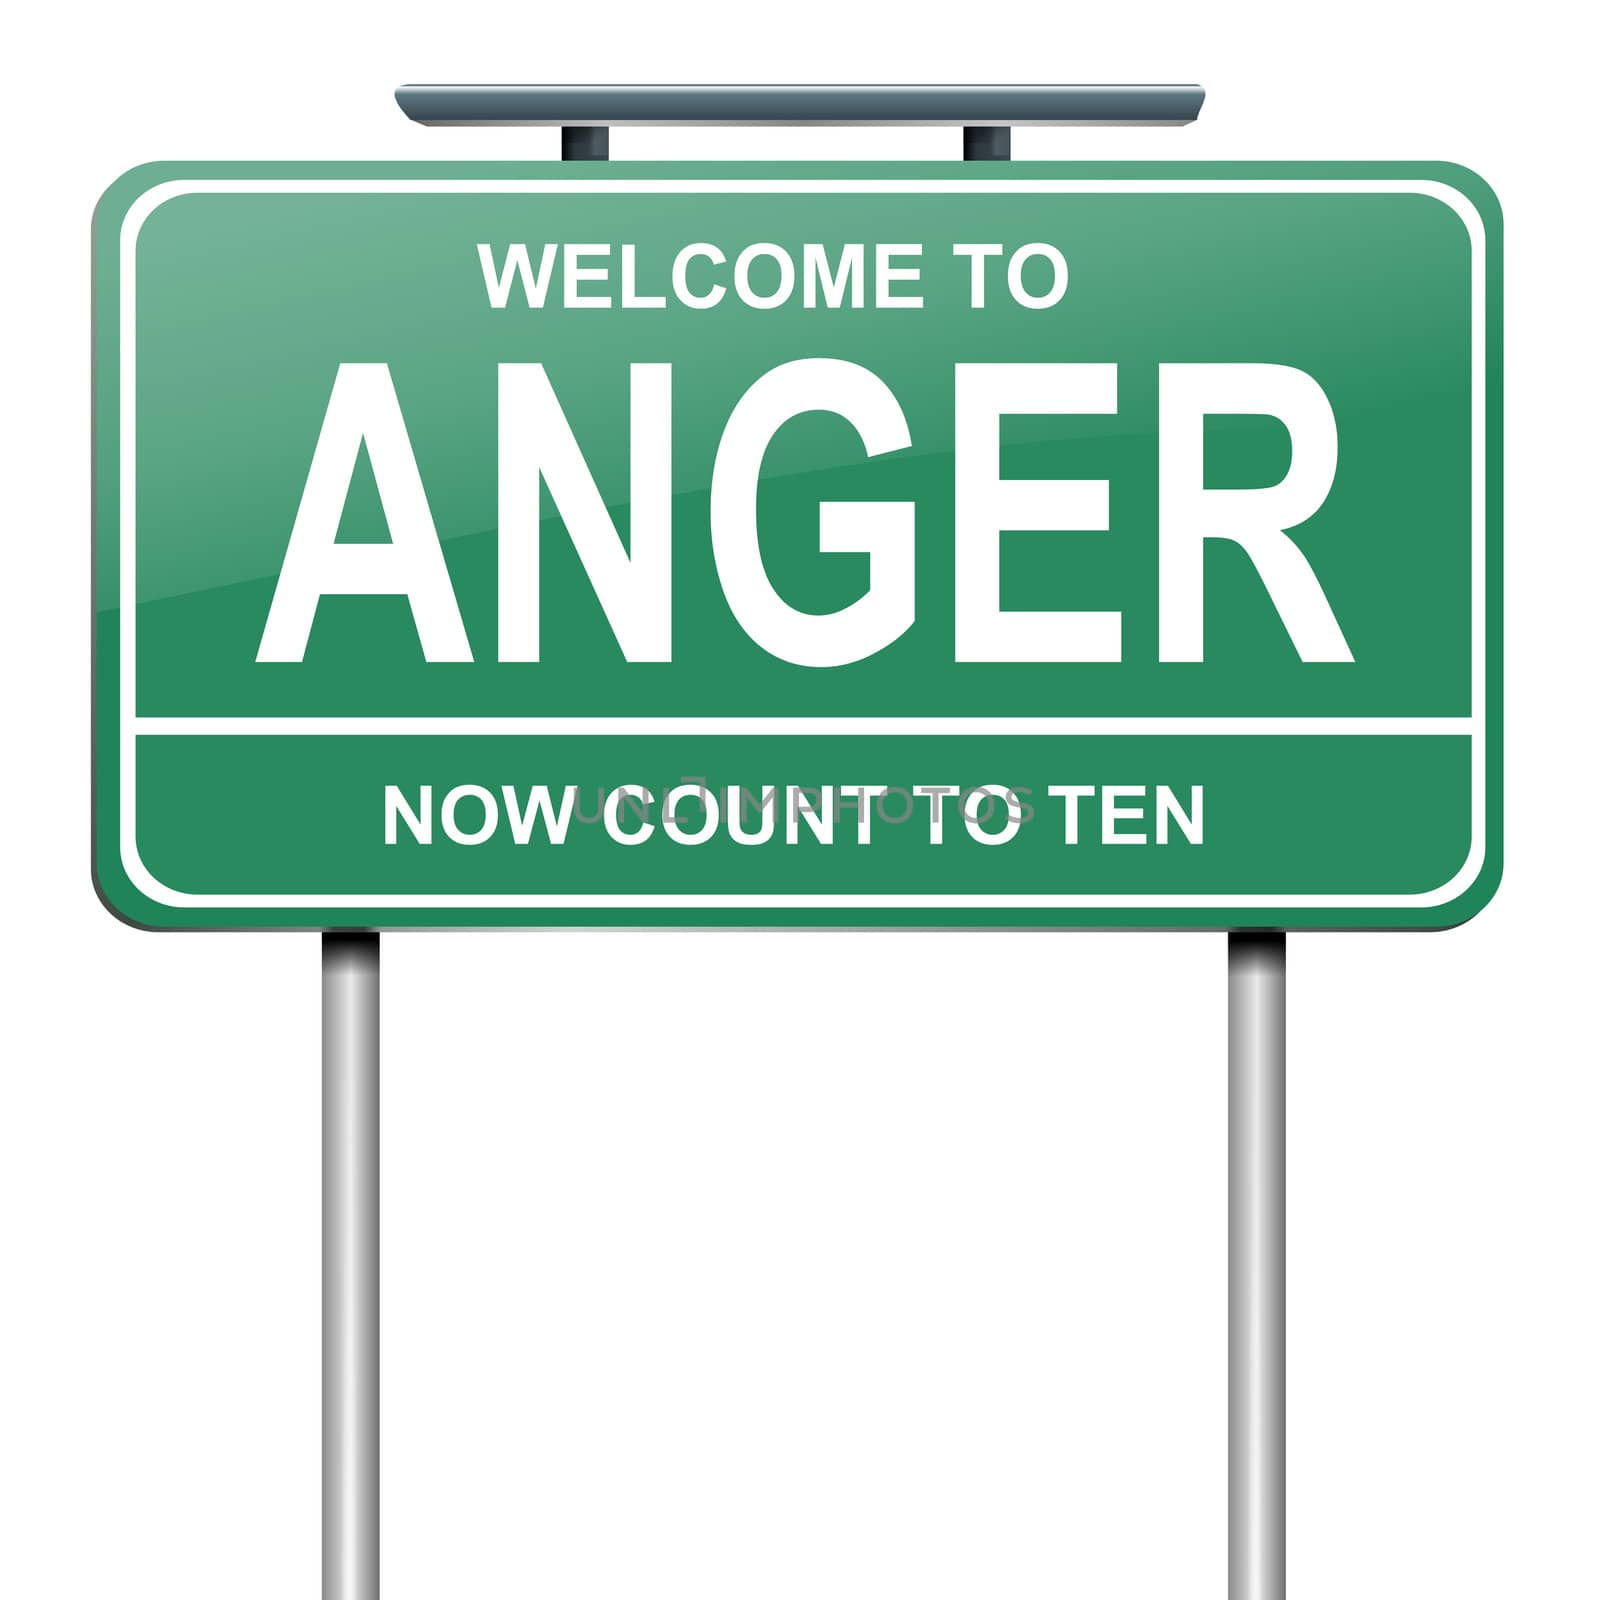 Illustration depicting a green roadsign with an anger concept. White background.